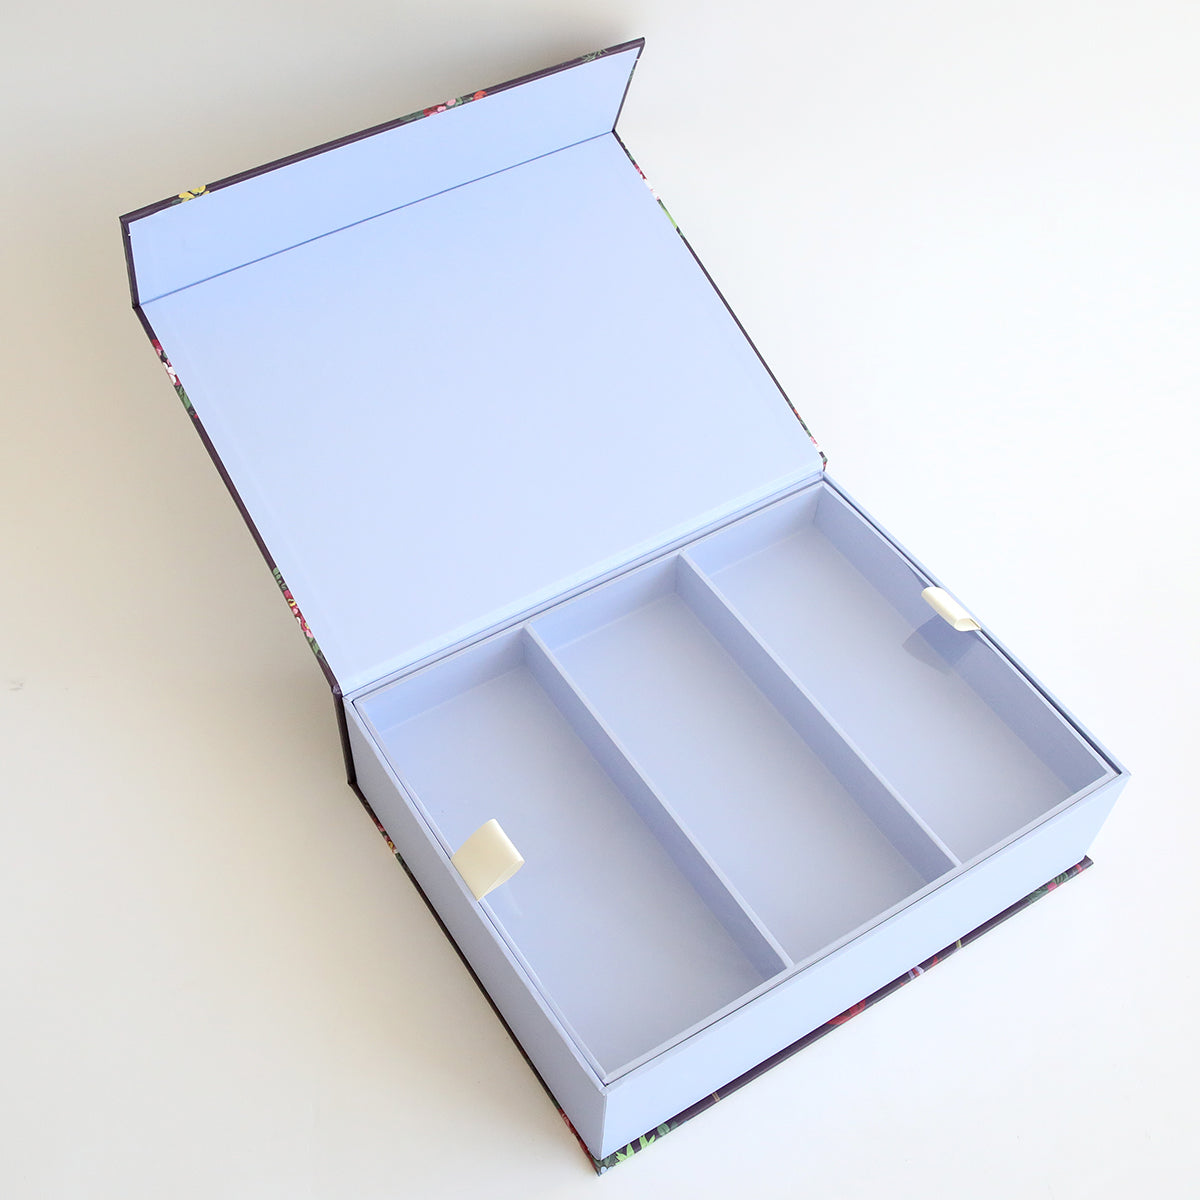 An Embellishment Storage Box - Astrid with three compartments is open on a white surface.